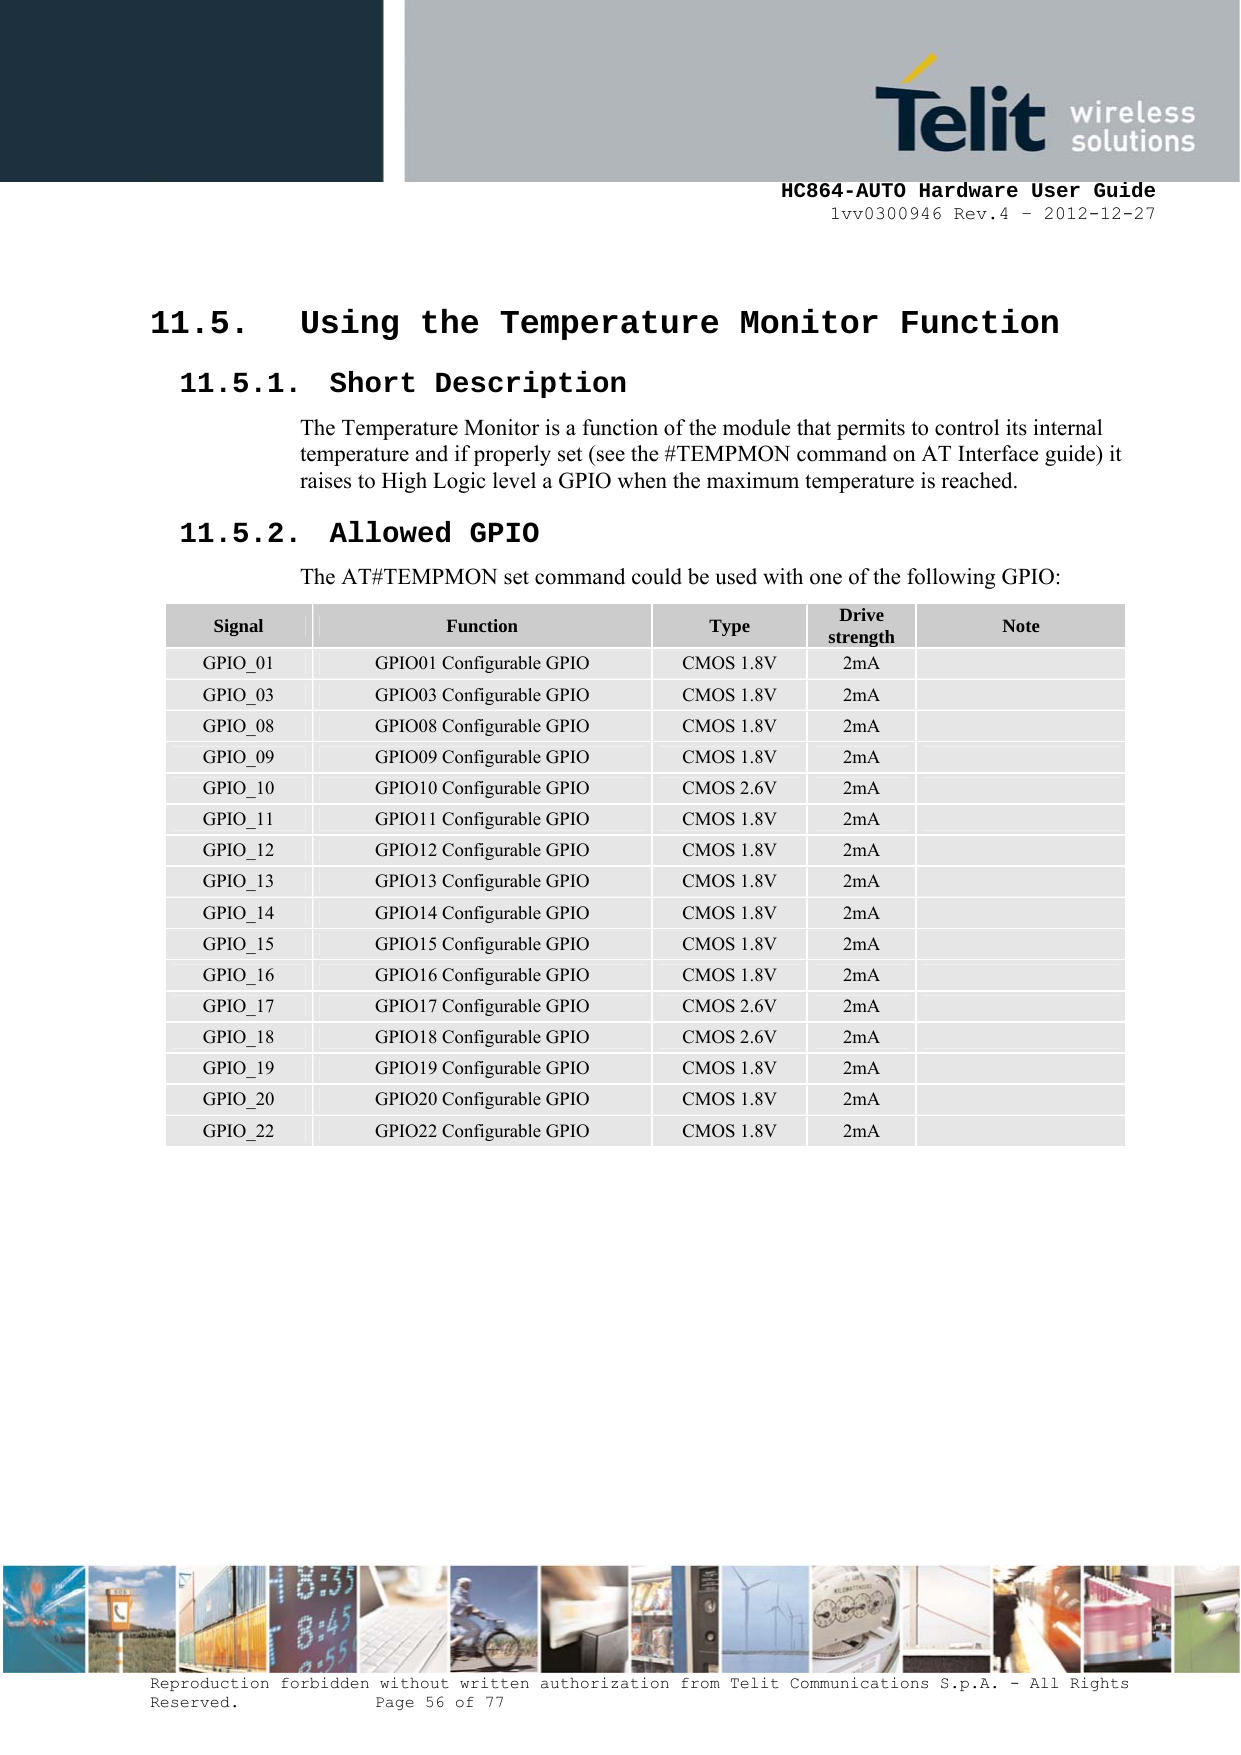     HC864-AUTO Hardware User Guide 1vv0300946 Rev.4 – 2012-12-27 Reproduction forbidden without written authorization from Telit Communications S.p.A. - All Rights Reserved.    Page 56 of 77   11.5. Using the Temperature Monitor Function 11.5.1. Short Description The Temperature Monitor is a function of the module that permits to control its internal temperature and if properly set (see the #TEMPMON command on AT Interface guide) it raises to High Logic level a GPIO when the maximum temperature is reached. 11.5.2. Allowed GPIO The AT#TEMPMON set command could be used with one of the following GPIO: Signal  Function  Type  Drive strength  Note GPIO_01  GPIO01 Configurable GPIO  CMOS 1.8V  2mA   GPIO_03  GPIO03 Configurable GPIO  CMOS 1.8V  2mA   GPIO_08  GPIO08 Configurable GPIO  CMOS 1.8V  2mA   GPIO_09  GPIO09 Configurable GPIO  CMOS 1.8V  2mA   GPIO_10  GPIO10 Configurable GPIO  CMOS 2.6V  2mA   GPIO_11  GPIO11 Configurable GPIO  CMOS 1.8V  2mA   GPIO_12  GPIO12 Configurable GPIO  CMOS 1.8V  2mA   GPIO_13  GPIO13 Configurable GPIO  CMOS 1.8V  2mA   GPIO_14  GPIO14 Configurable GPIO  CMOS 1.8V  2mA   GPIO_15  GPIO15 Configurable GPIO  CMOS 1.8V  2mA   GPIO_16  GPIO16 Configurable GPIO  CMOS 1.8V  2mA   GPIO_17  GPIO17 Configurable GPIO  CMOS 2.6V  2mA   GPIO_18  GPIO18 Configurable GPIO  CMOS 2.6V  2mA   GPIO_19  GPIO19 Configurable GPIO  CMOS 1.8V  2mA   GPIO_20  GPIO20 Configurable GPIO  CMOS 1.8V  2mA   GPIO_22  GPIO22 Configurable GPIO  CMOS 1.8V  2mA    